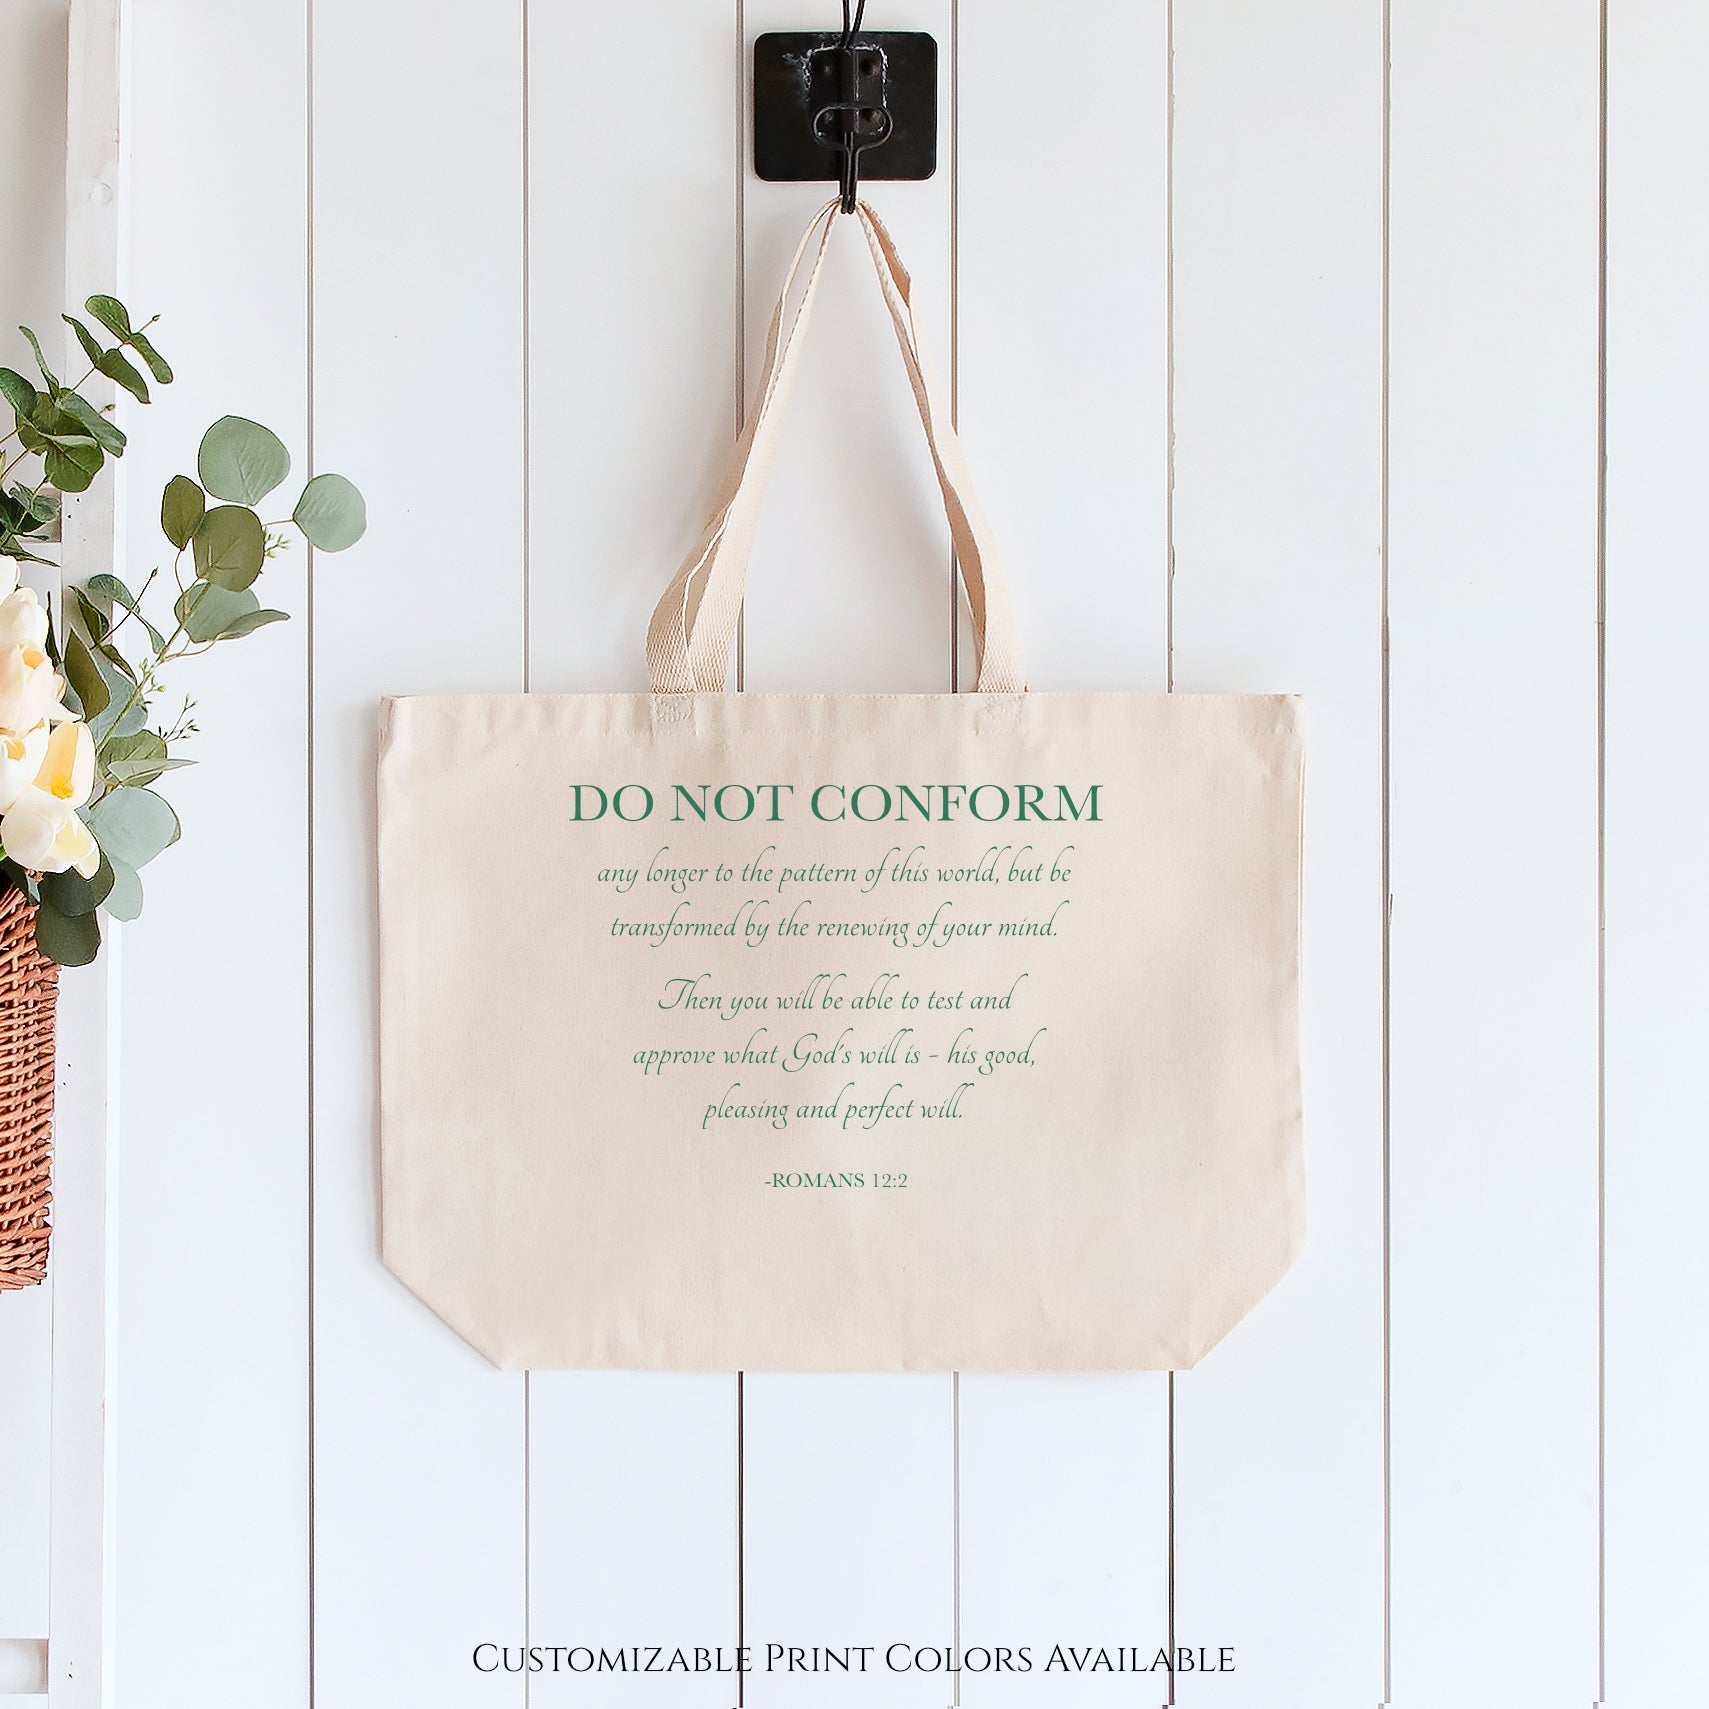 Do not conform any longer to the pattern of this world, but be transformed by the reviewing of your mind. Then you will be able to test and approve what God's will is - his goo, pleasing and perfect will. - Romans 12:2, Canvas Tote Bag